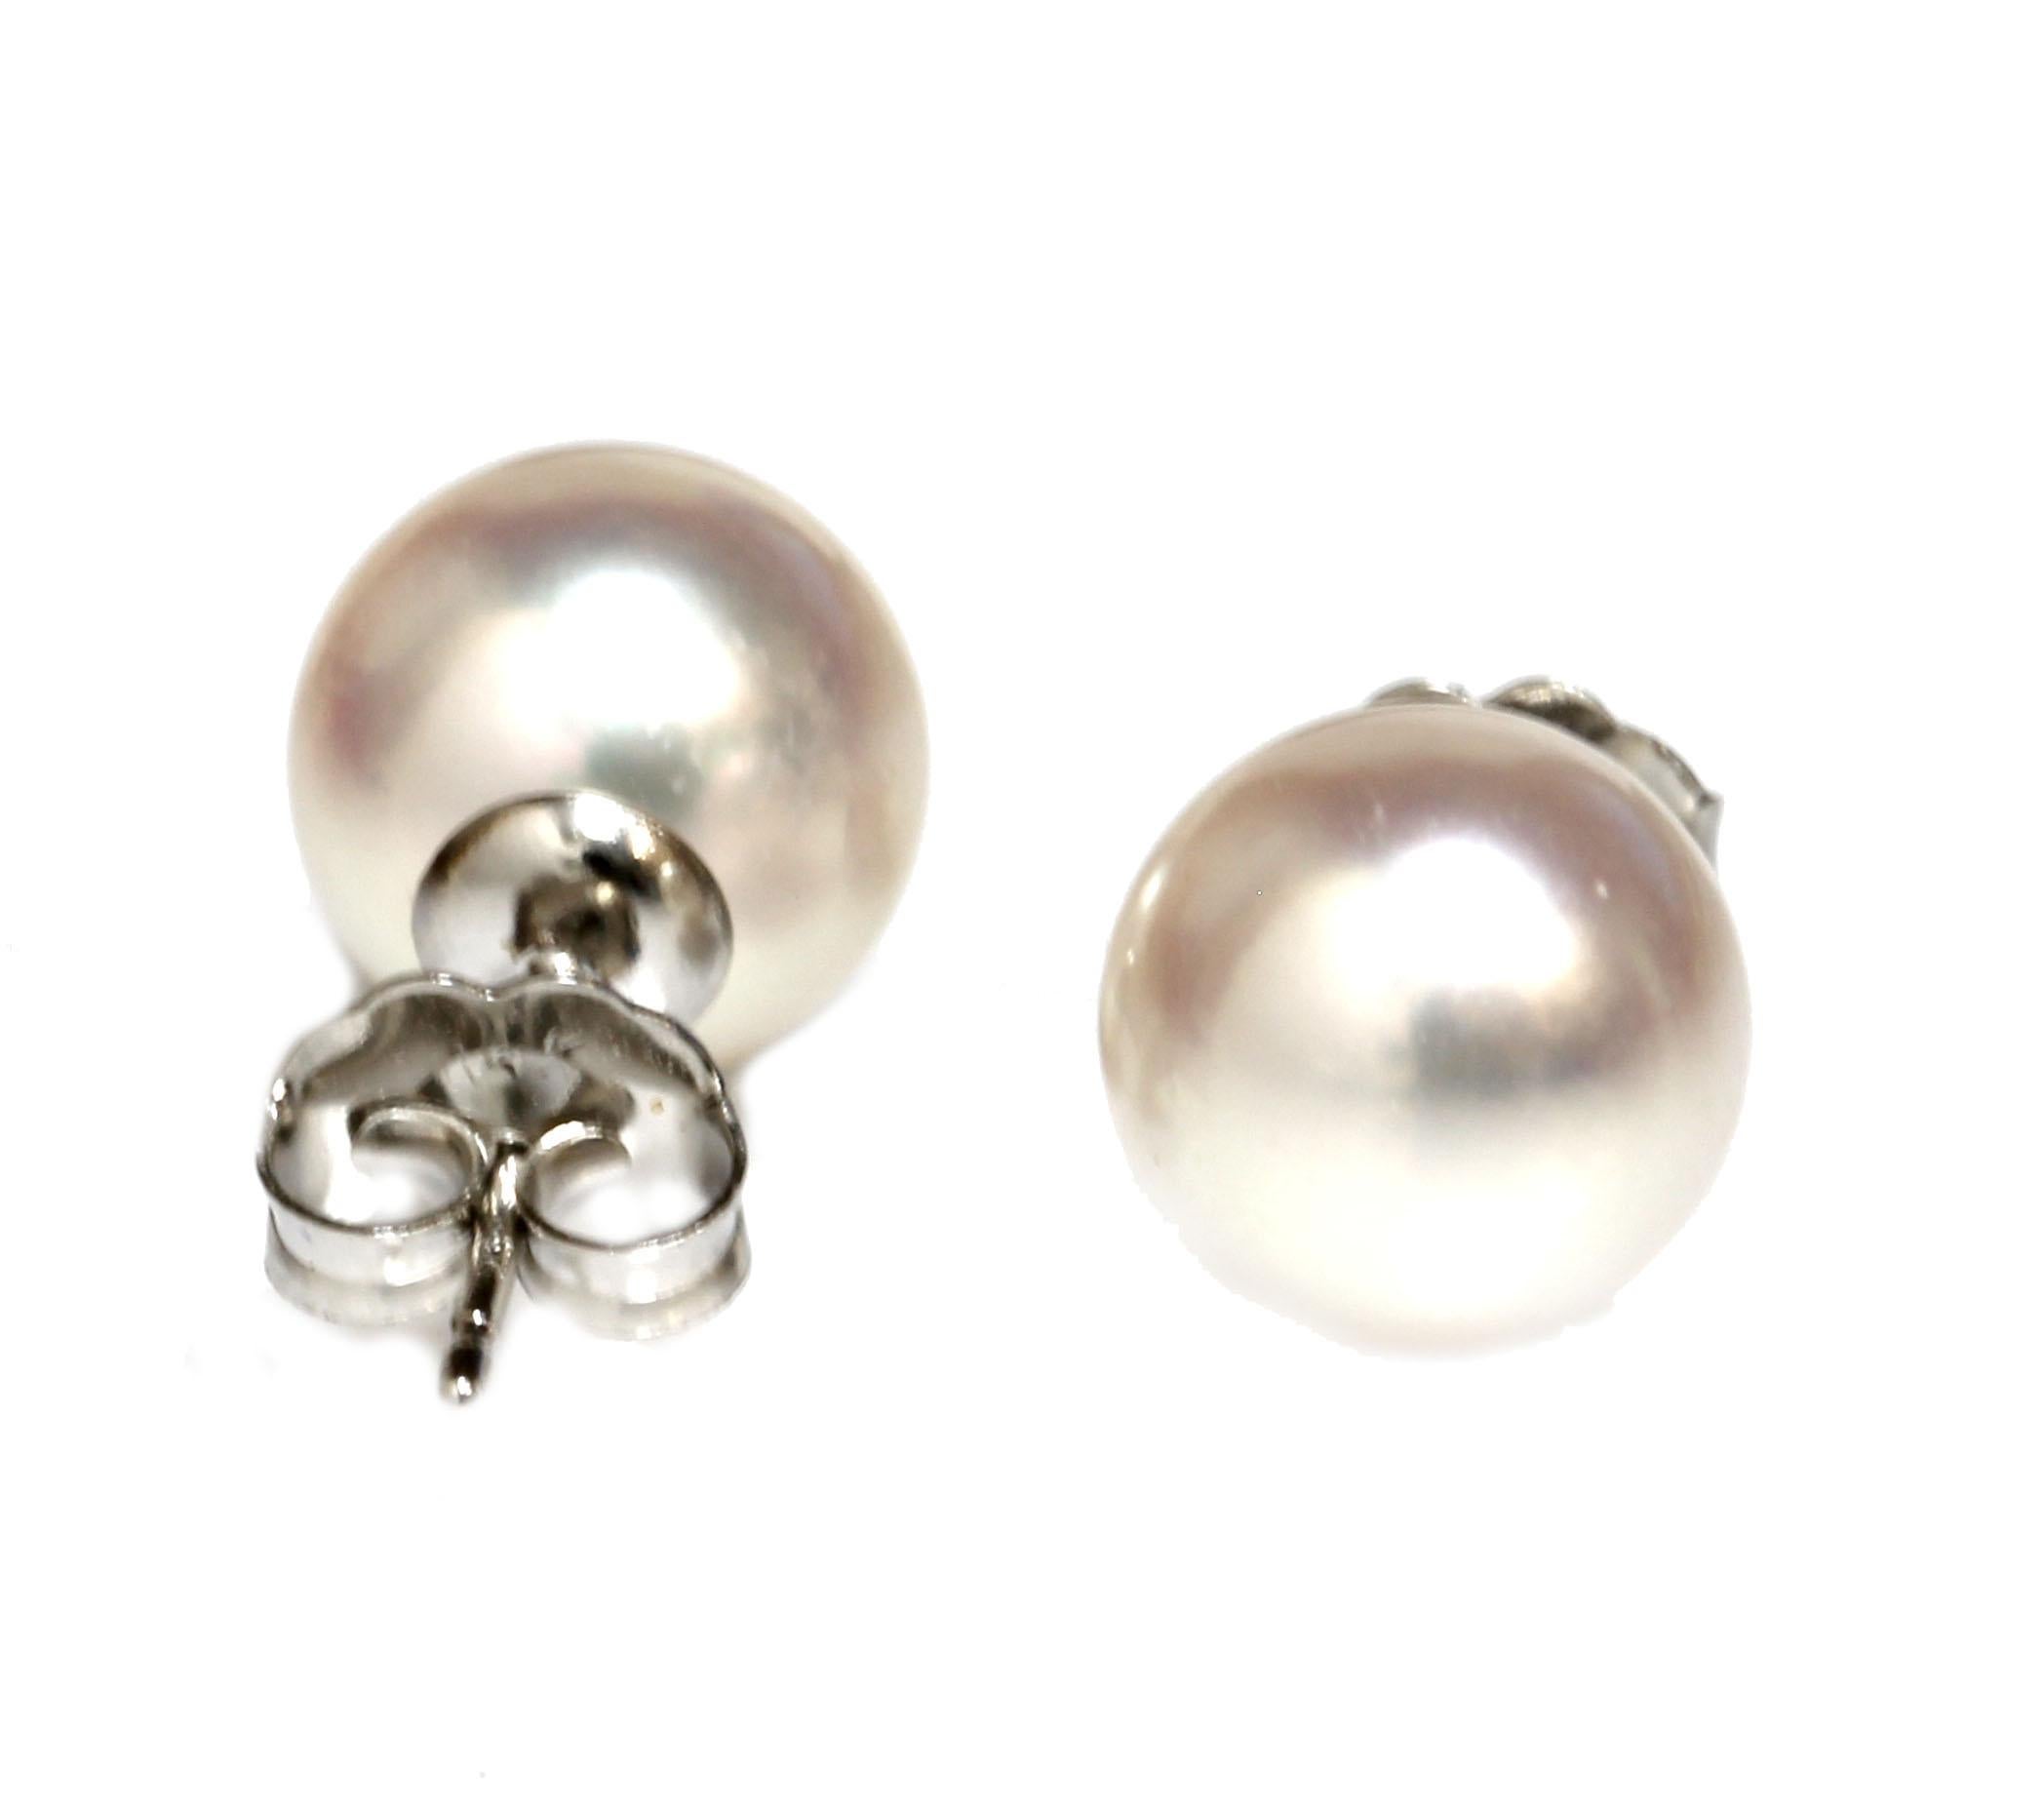 Our traditional classic saltwater akoya pearl stud earrings, the size is 9 - 9.5mm with top luster and nacre. They are flawless in surface clarity.  They are perfect round pearls with perfect classic white in color . They are set in 14k white gold